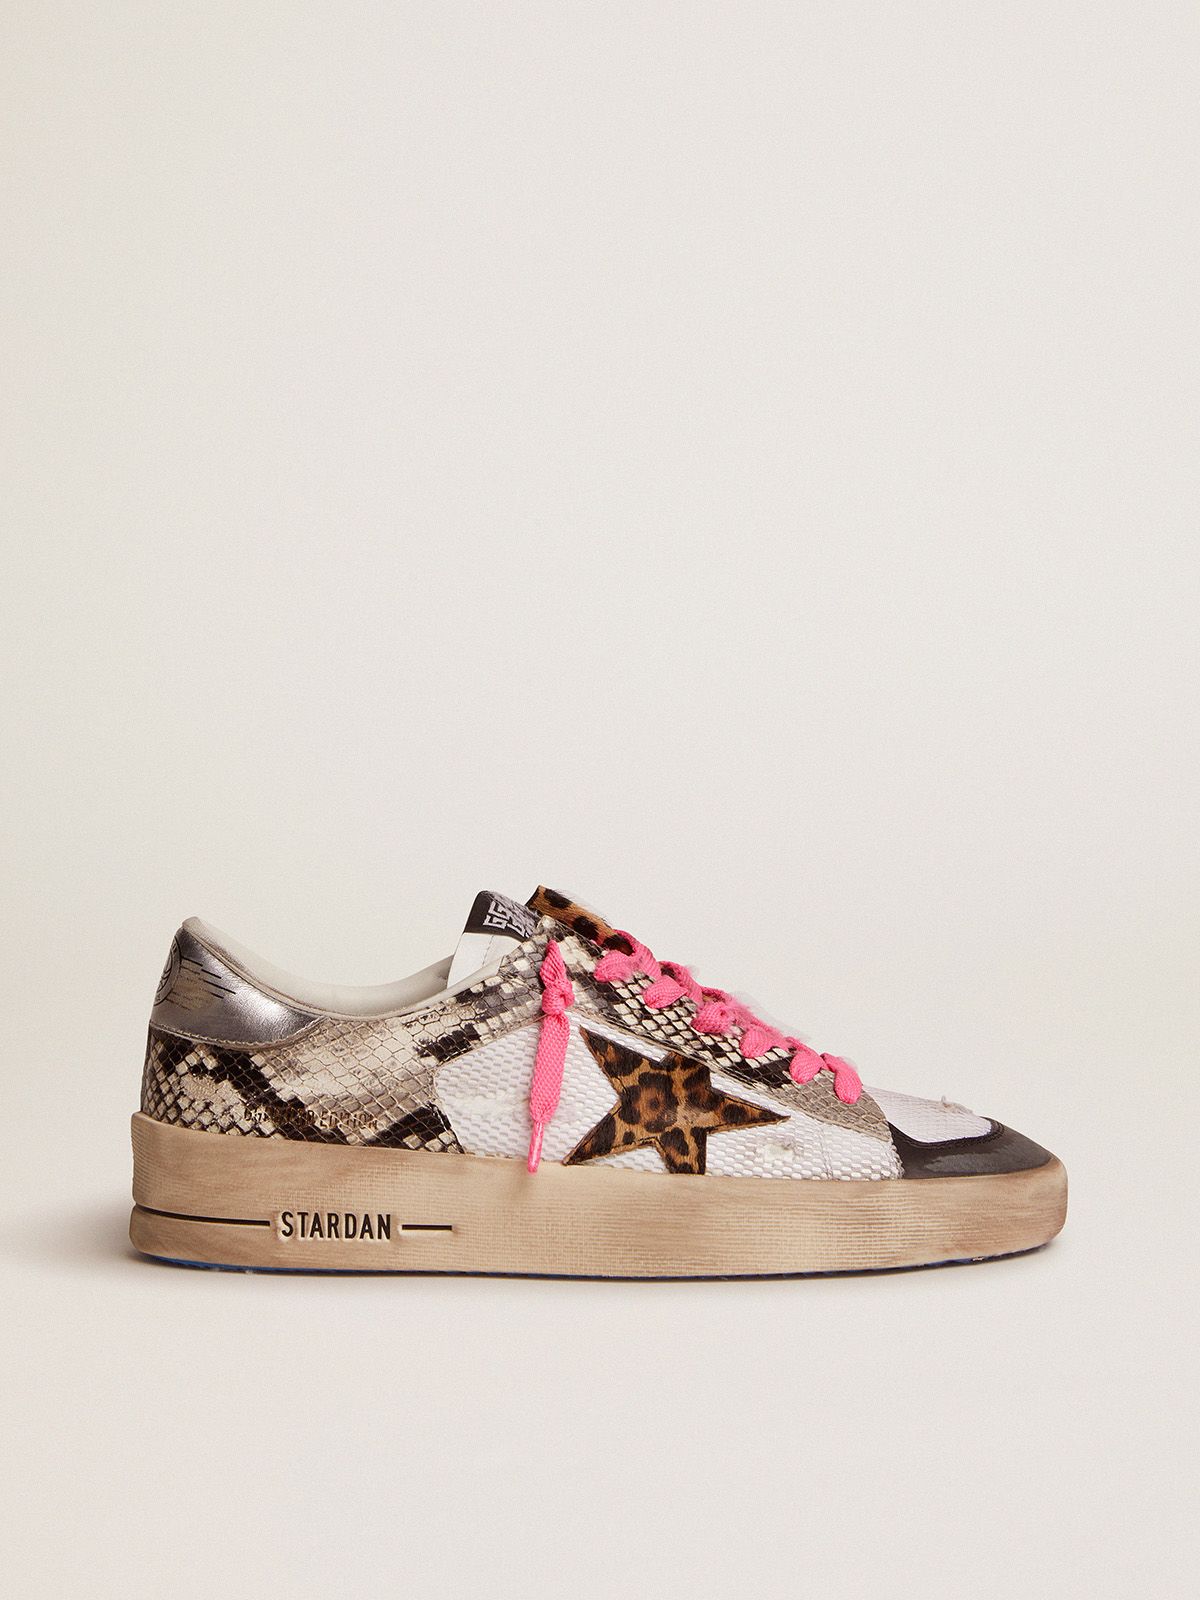 golden goose LAB upper leather and Stardan leopard-print sneakers skin snake-print star pony with